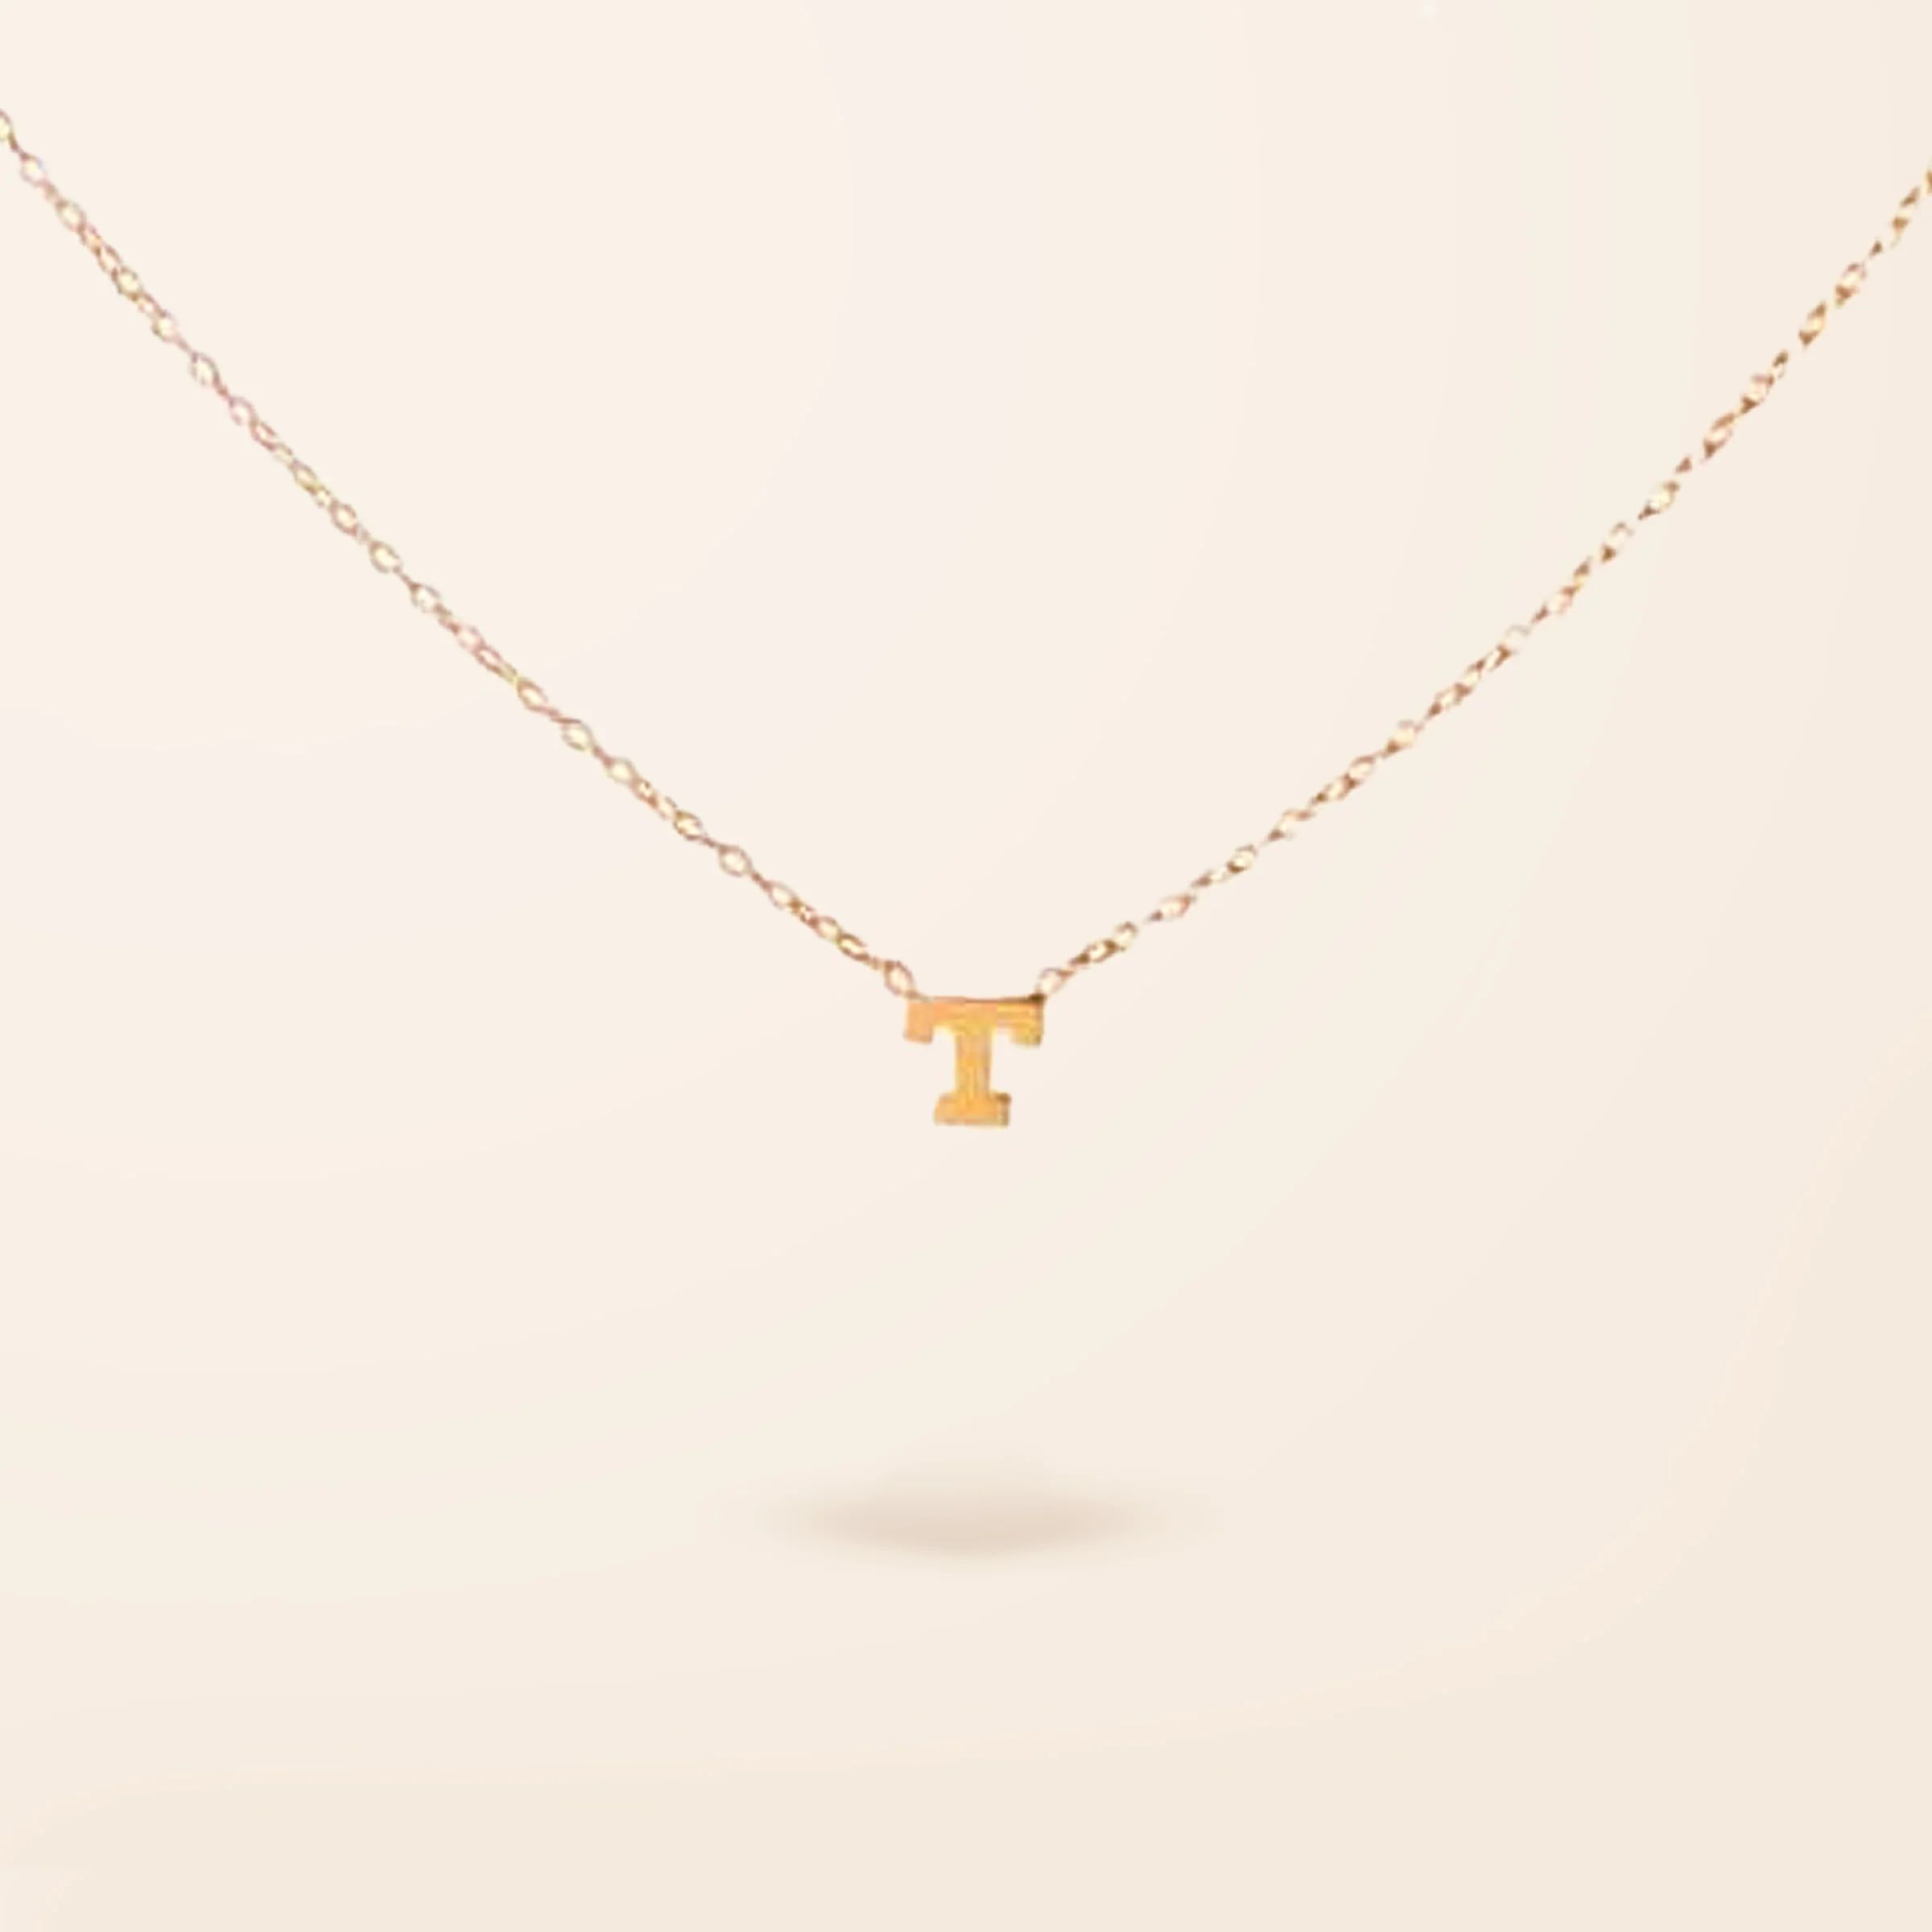 14K Gold One Drop Initial Necklace | Van Der Hout Jewelry